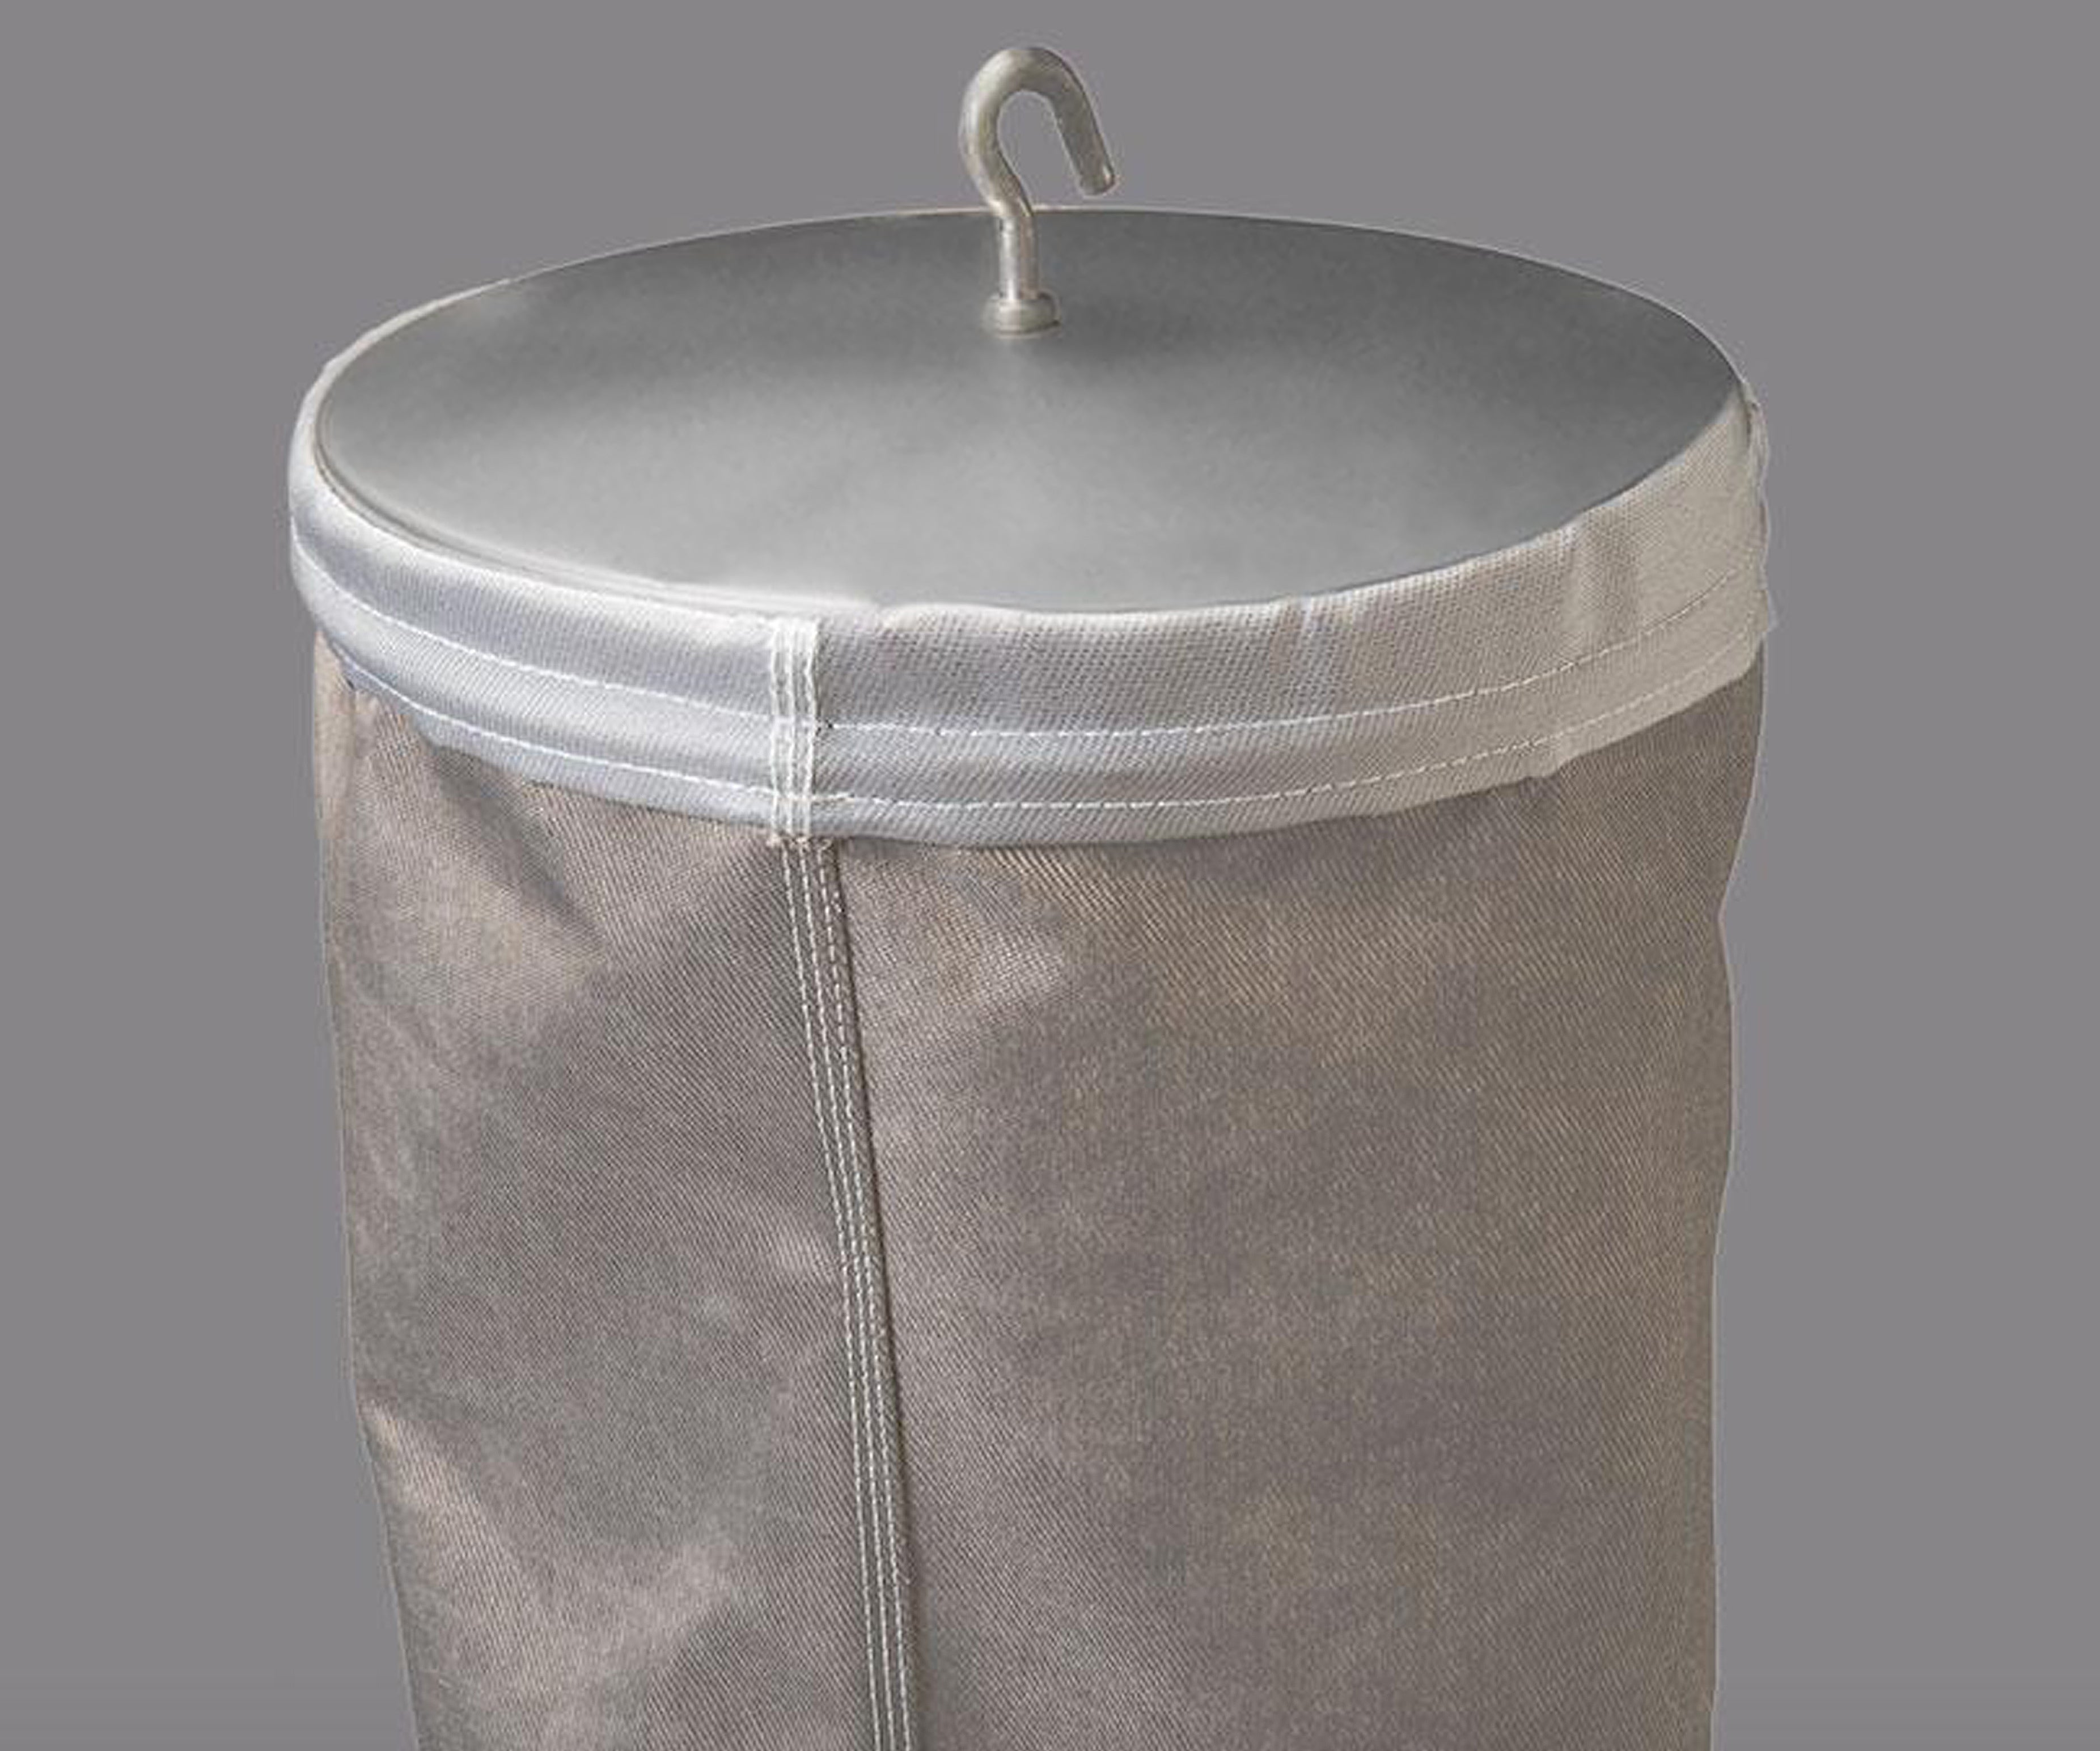 New GORE® LOW DRAG™ Filter Bags for Carbon Black production